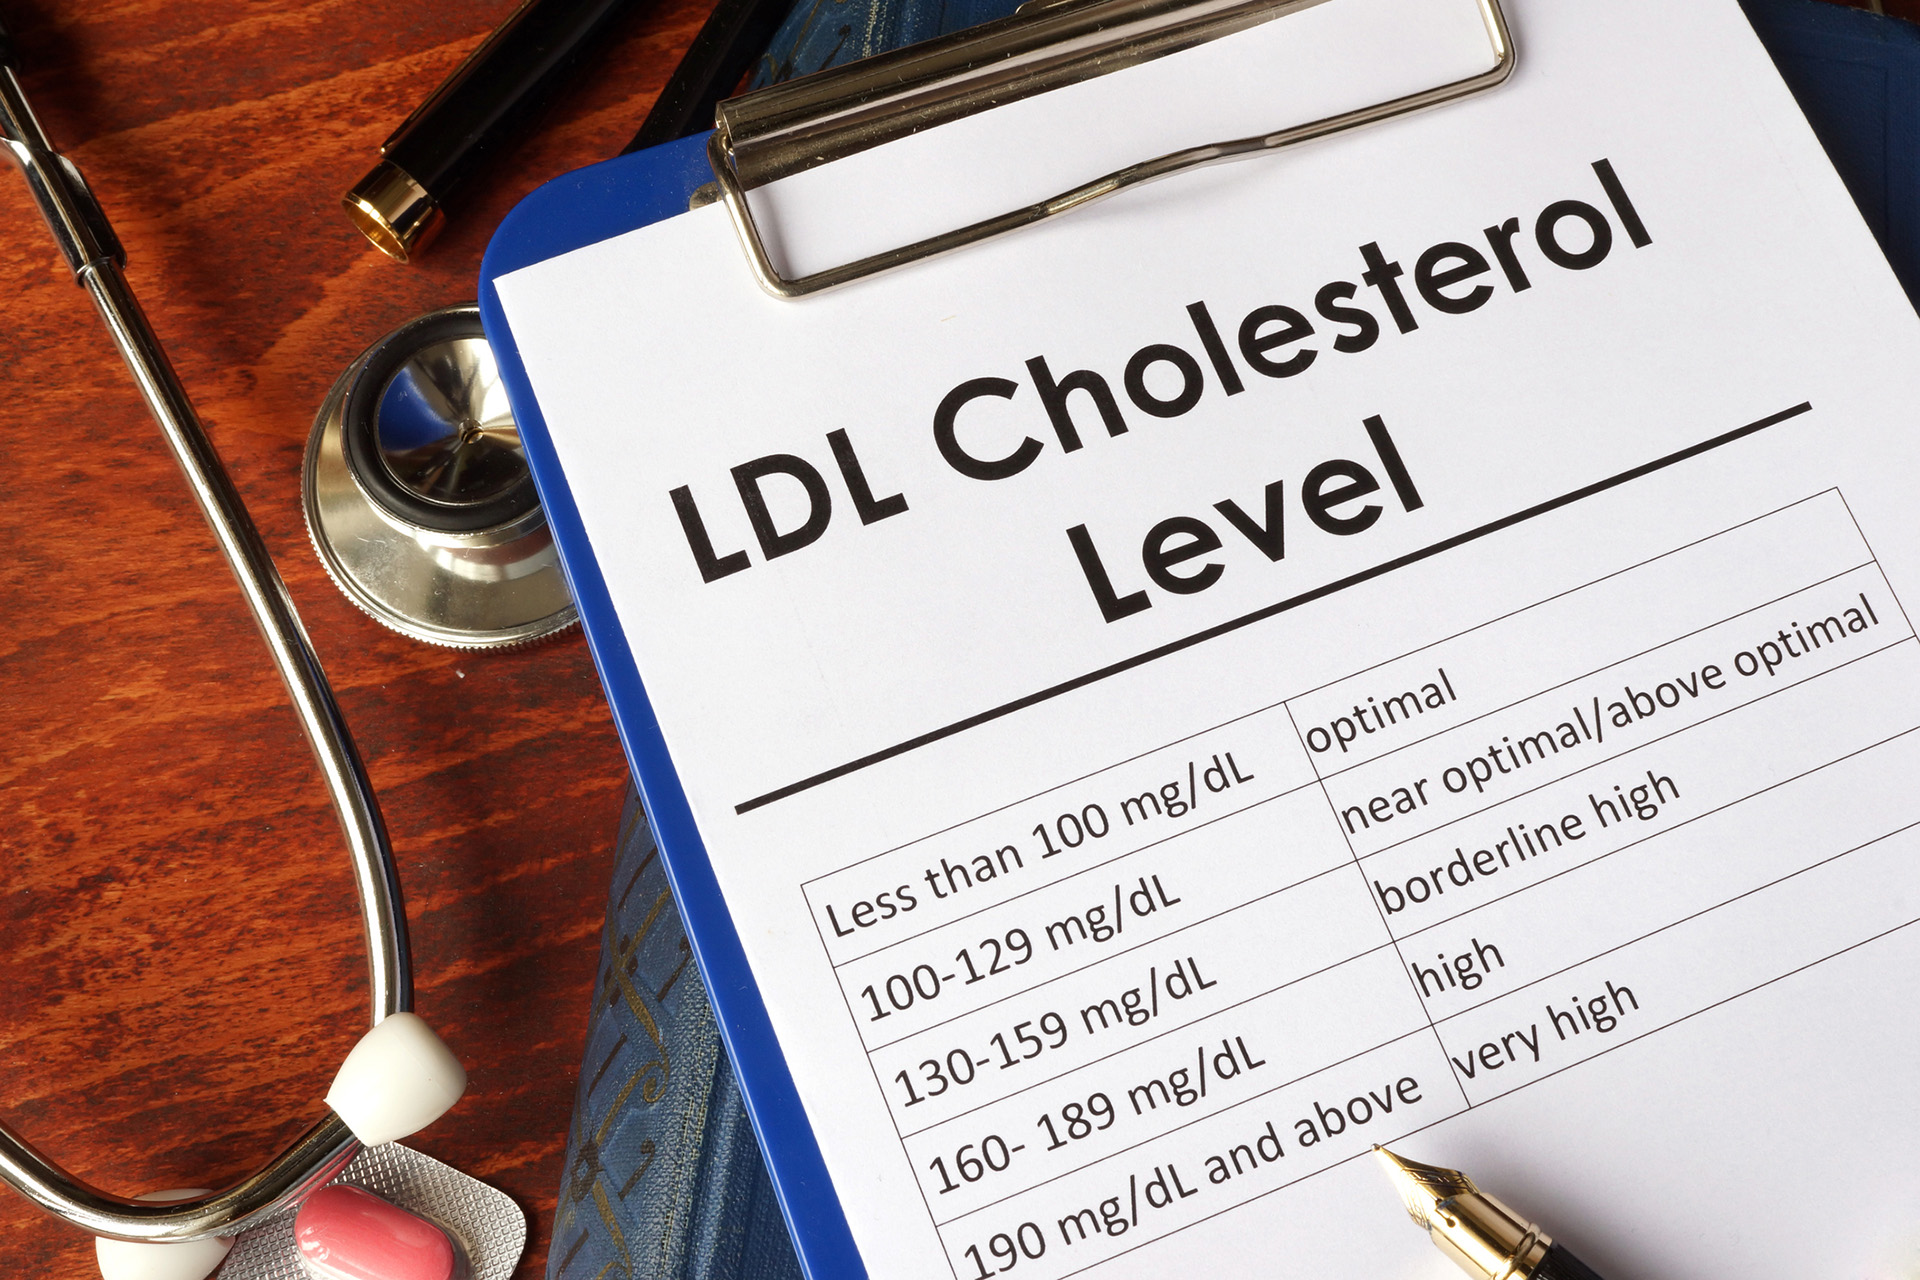 A clipboard holding a piece of paper with the heading "LDL Cholesterol Level" and five levels of cholesterol measurements (optimal, near optimal, borderline high, high, very high) displayed underneath. 